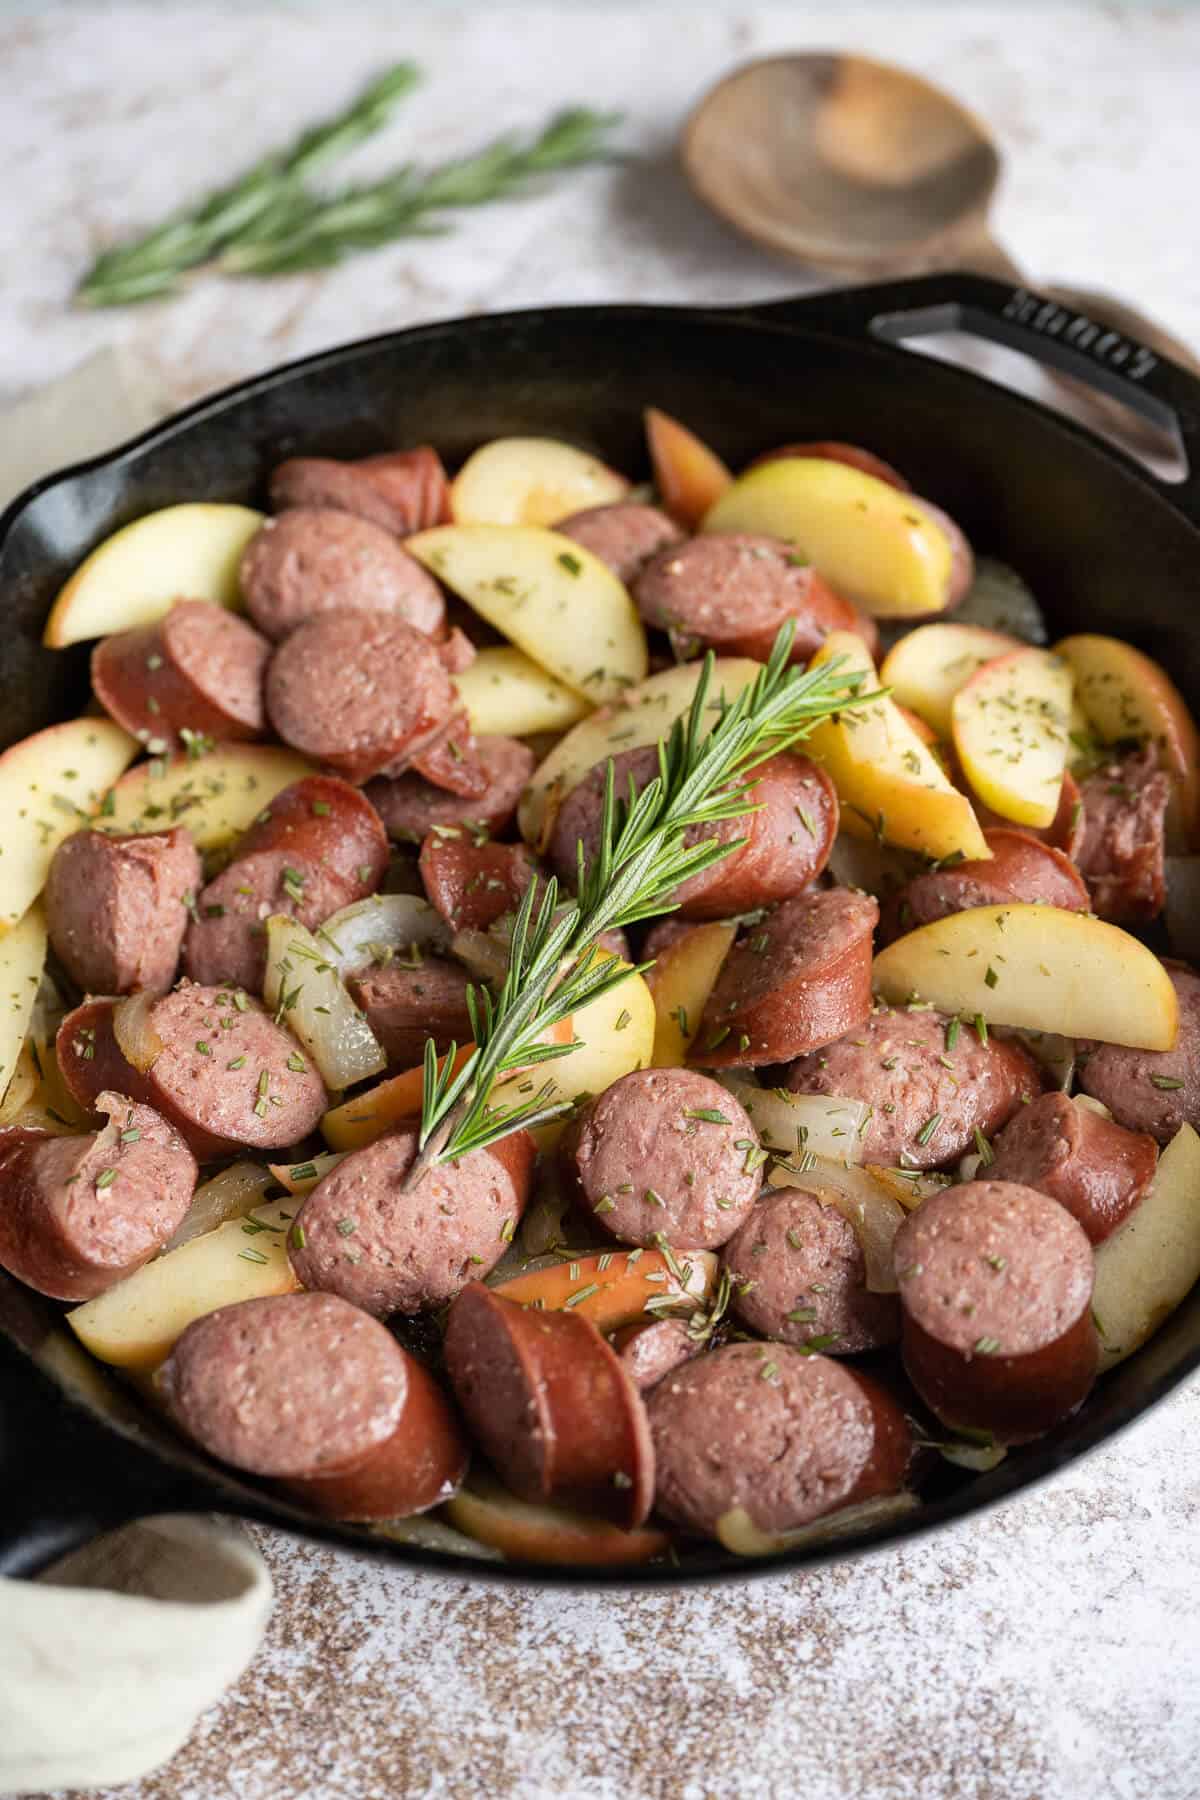 https://www.artfrommytable.com/wp-content/uploads/2021/10/kielbasa_skillet_with_apples_and_onions.jpg